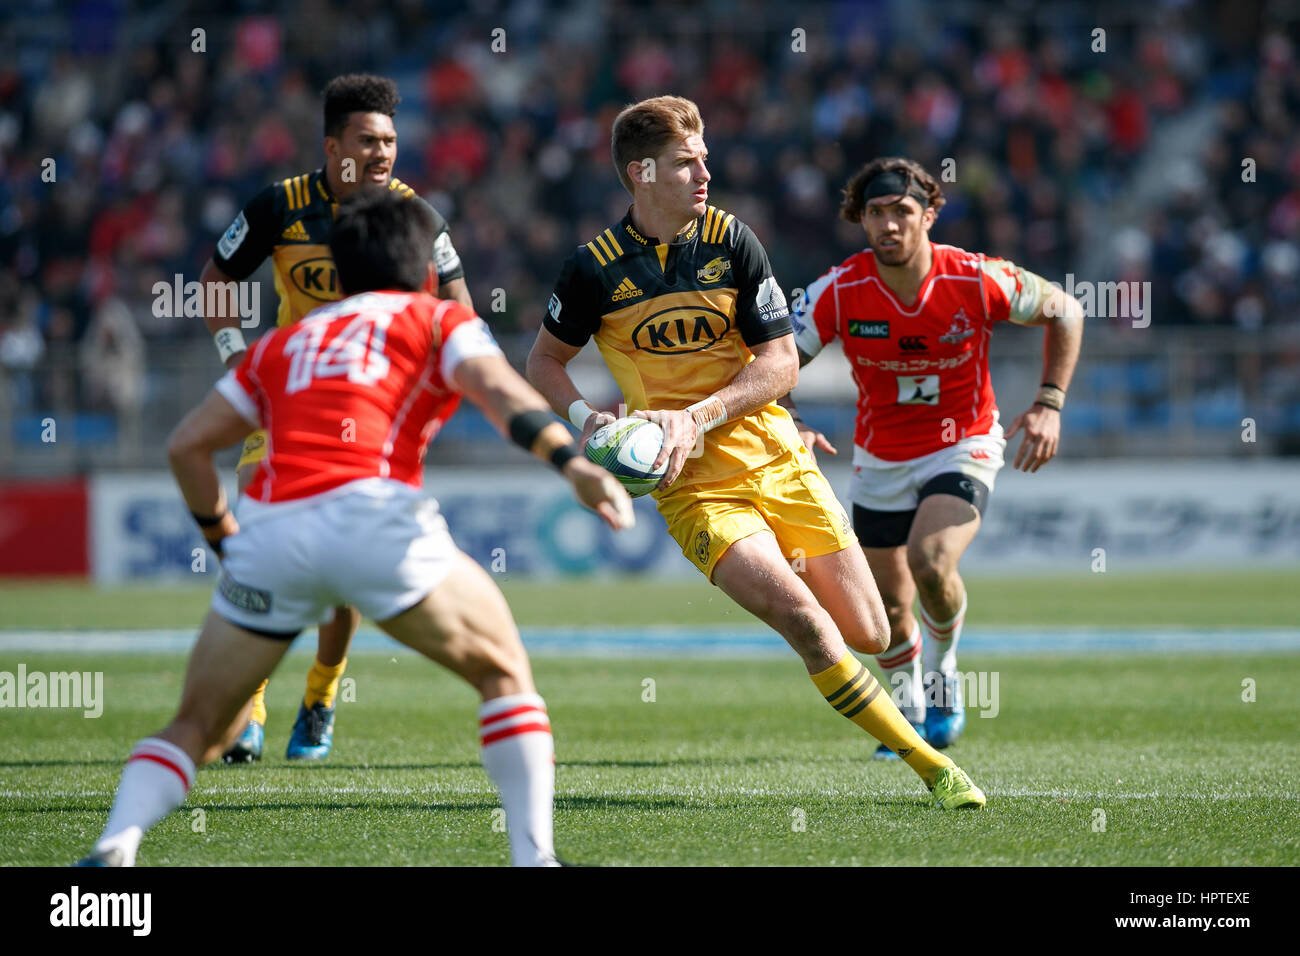 Tokyo, Japan. 25th Feb, 2017. James Blackwell of the Hurricanes (C) in action for HITO-Communications Sunwolves vs Hurricanes in the Super Rugby 2017 Round 1 game at Prince Chichibu Memorial Stadium on February 25, 2017 in Tokyo, Japan. The Hurricanes won the match. Credit: Rodrigo Reyes Marin/AFLO/Alamy Live News Stock Photo